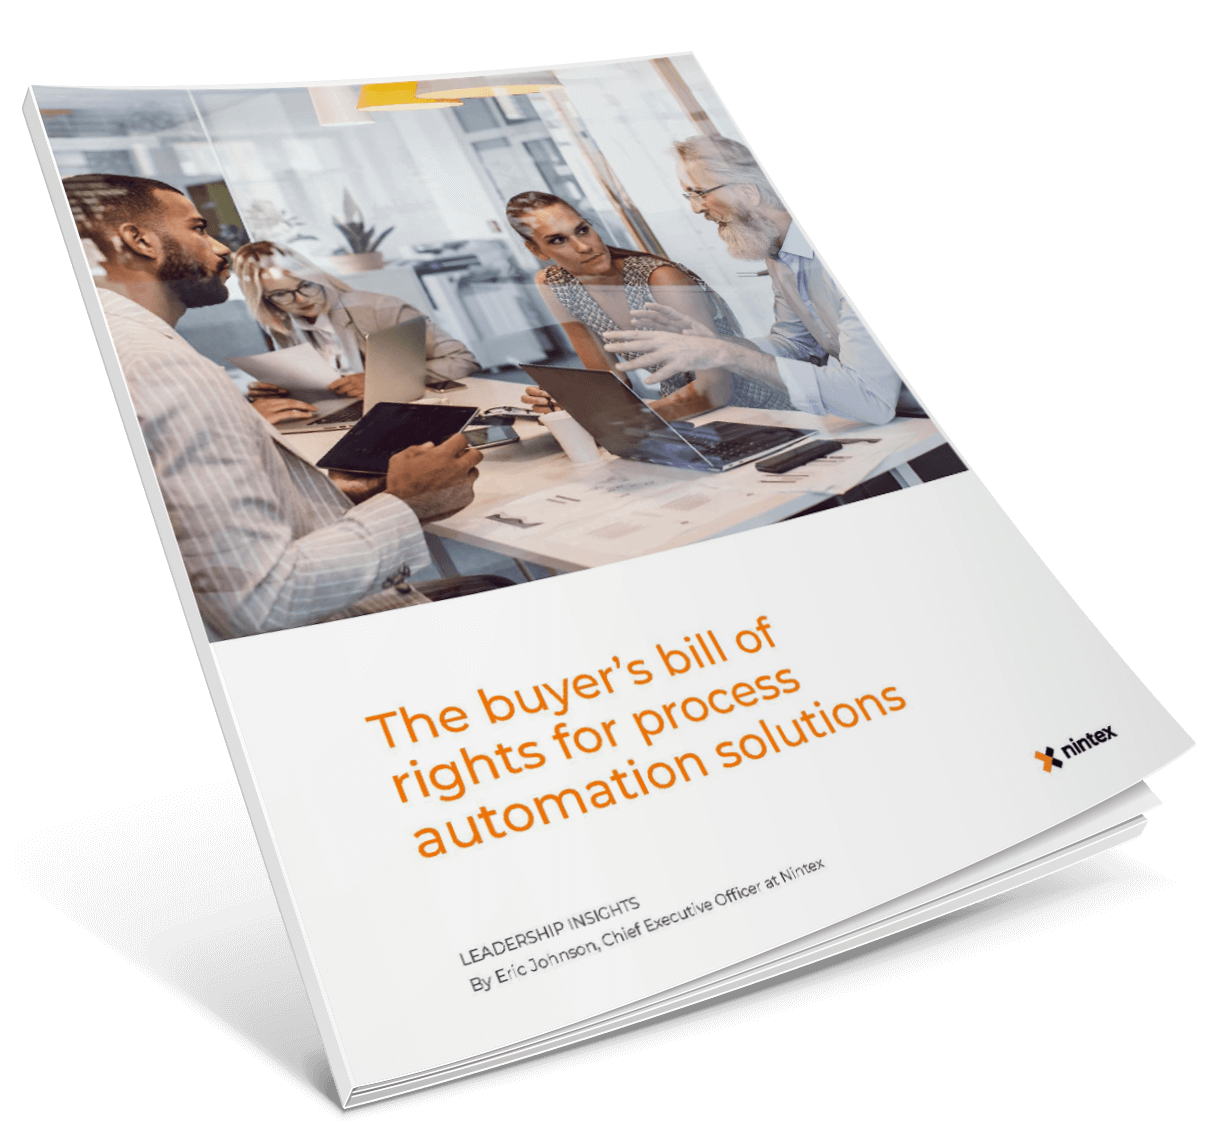 The buyer’s bill of rights for process automation solutions: Part 1